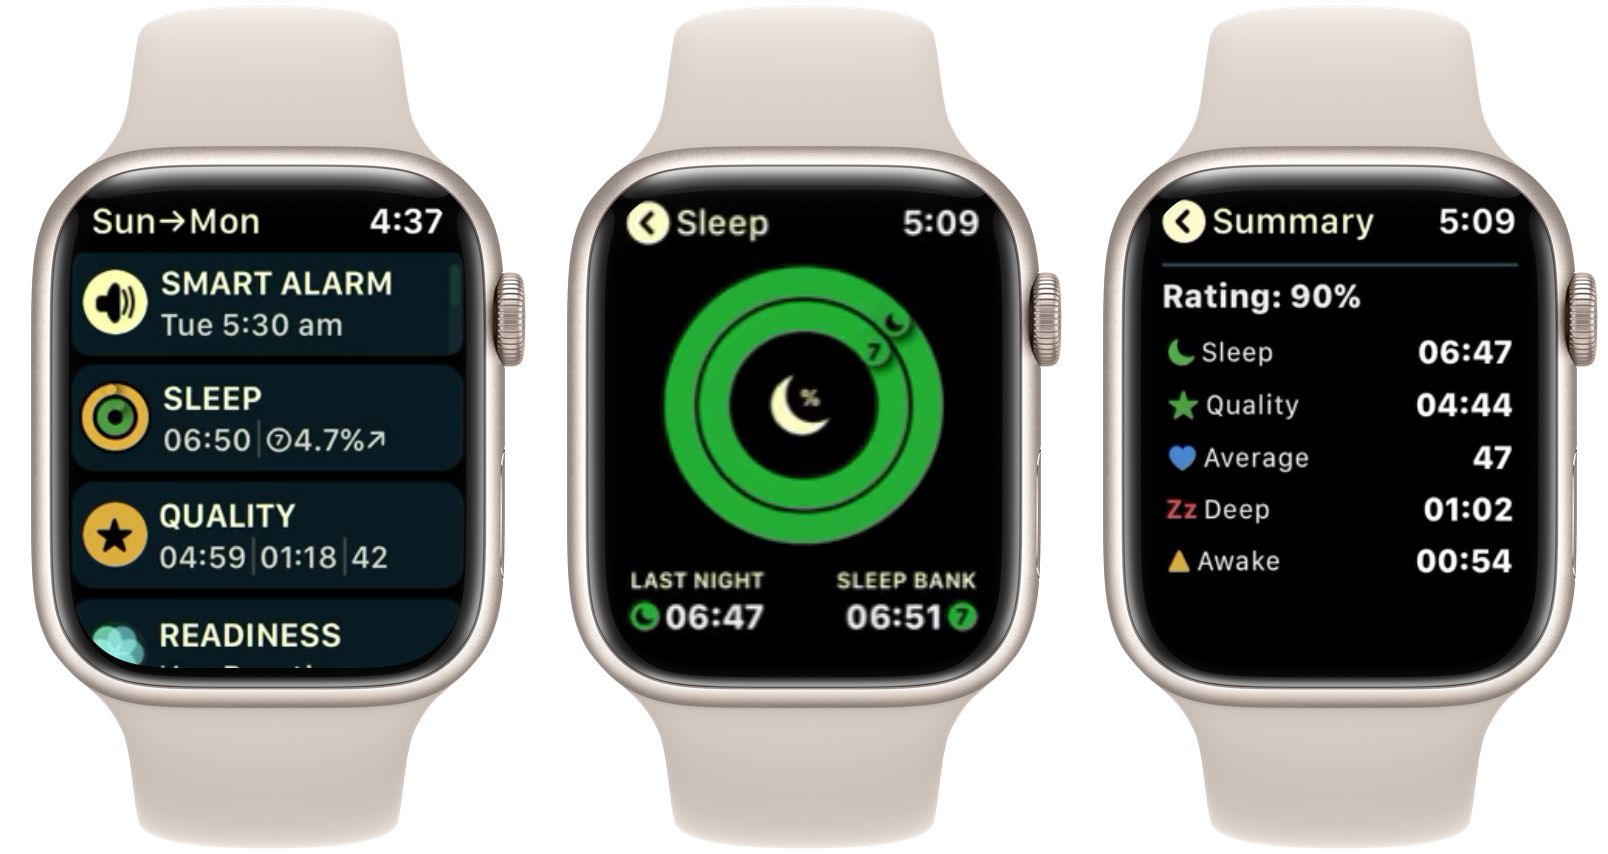 7 Best Sleep Apps for the Apple Watch